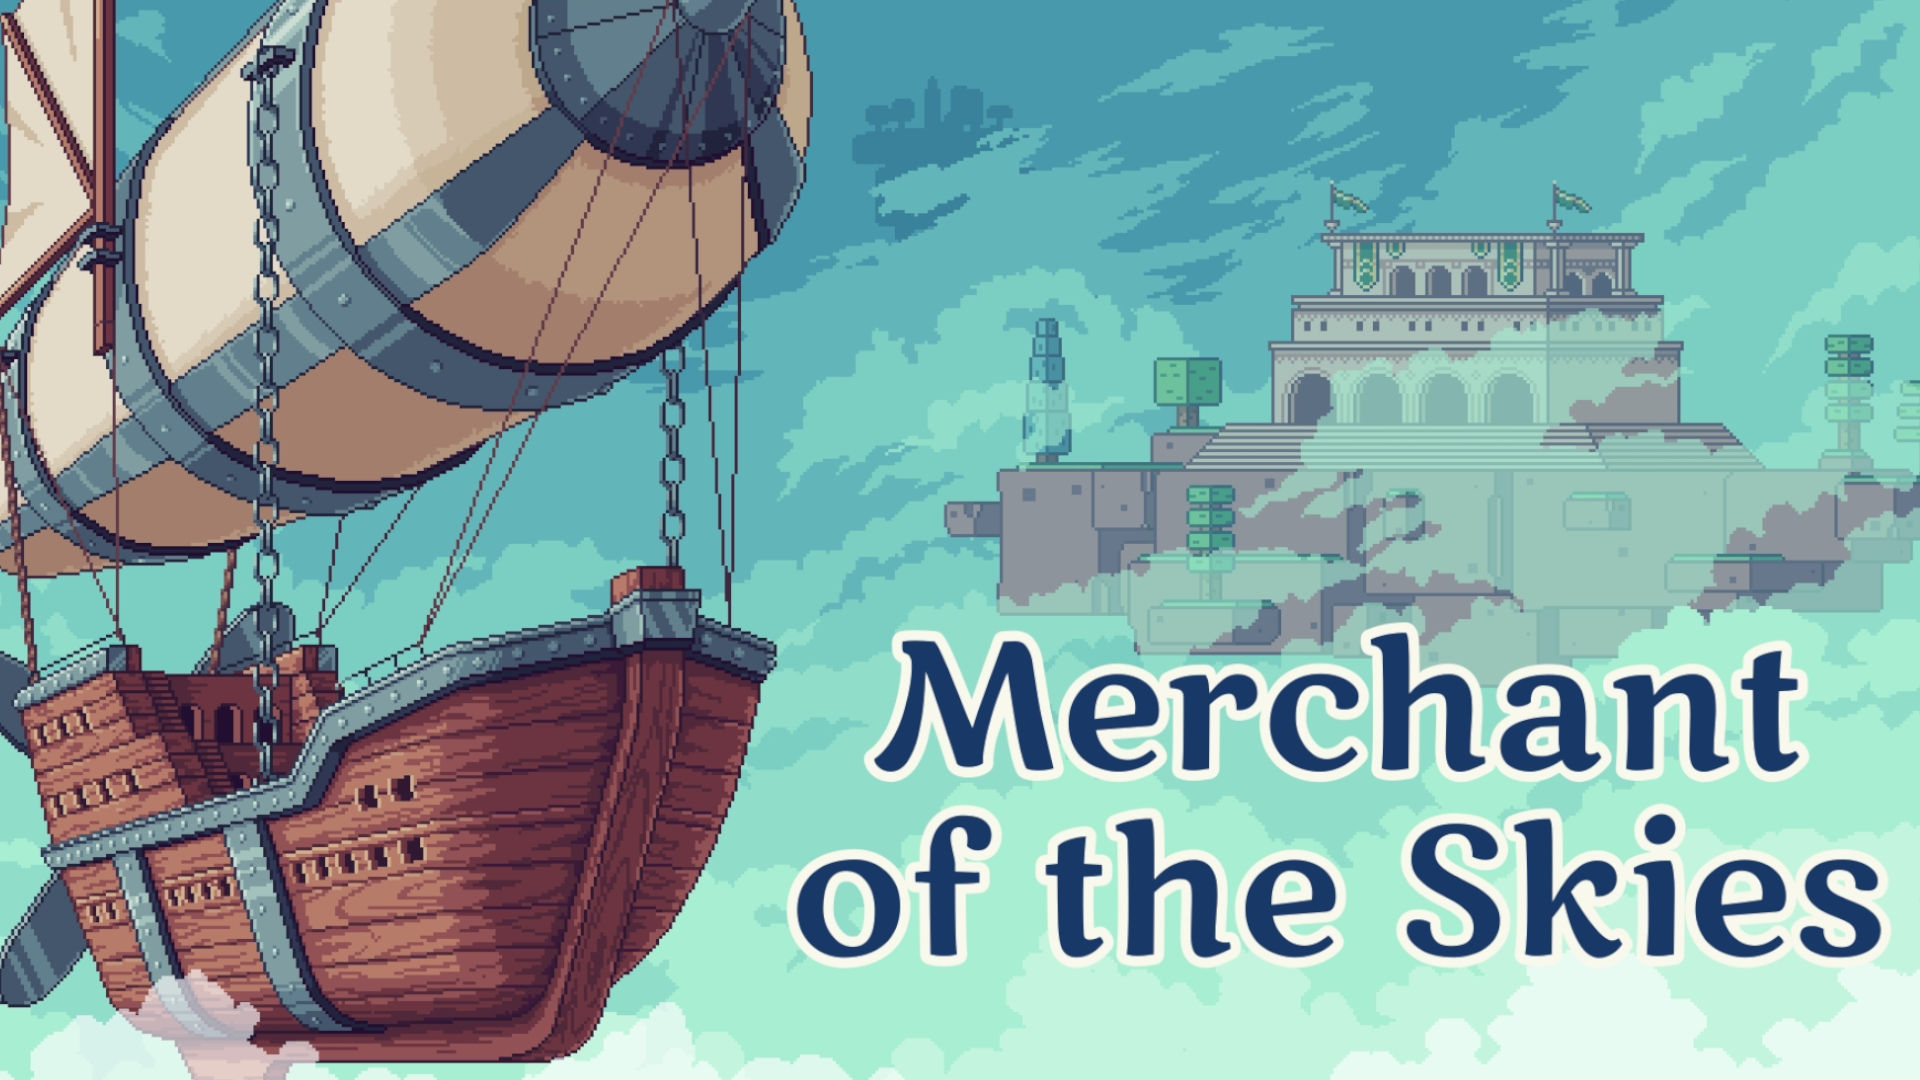 Merchant of the skies cover art